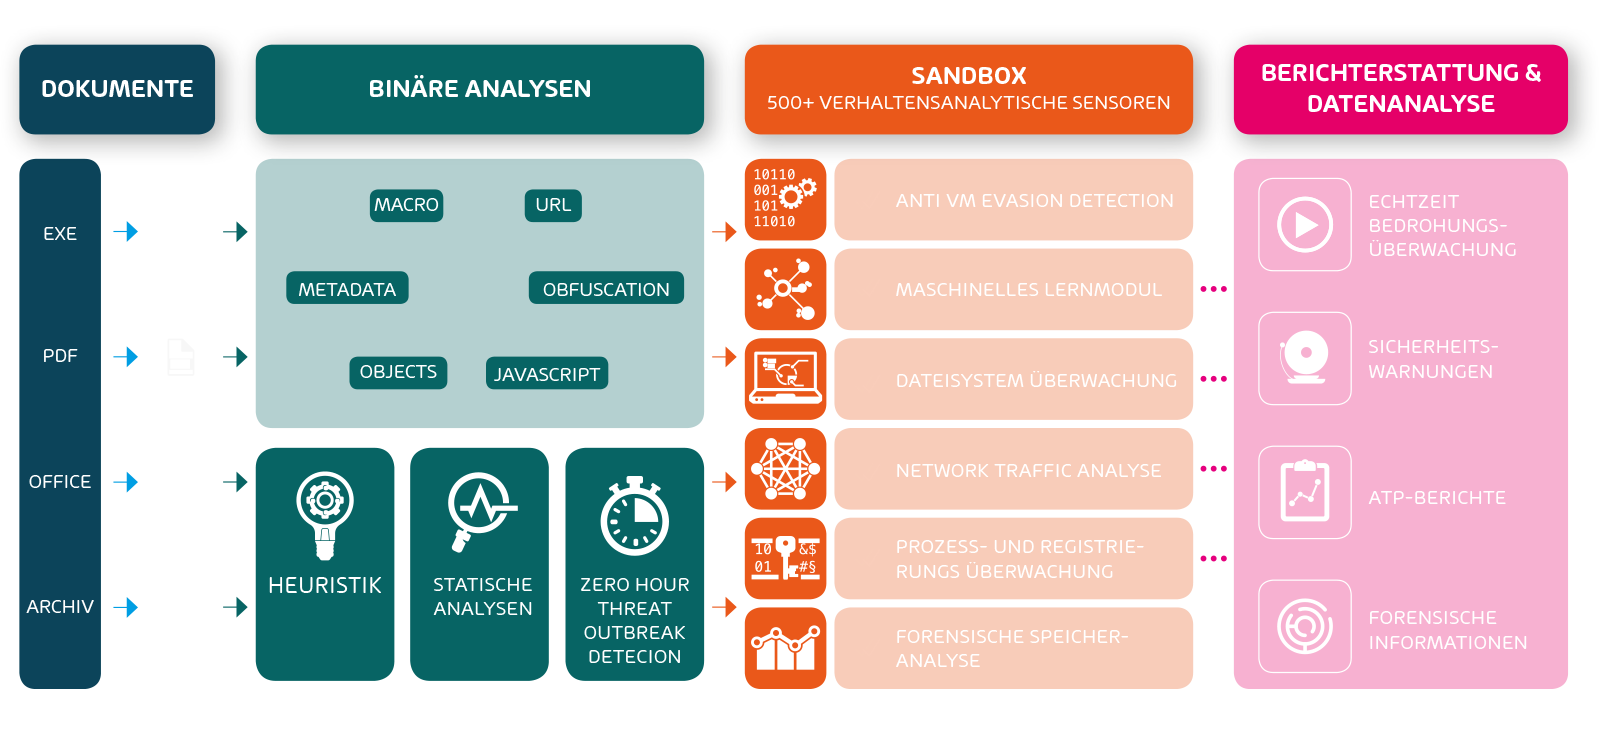 Funktionsweise von Advanced Threat Protection